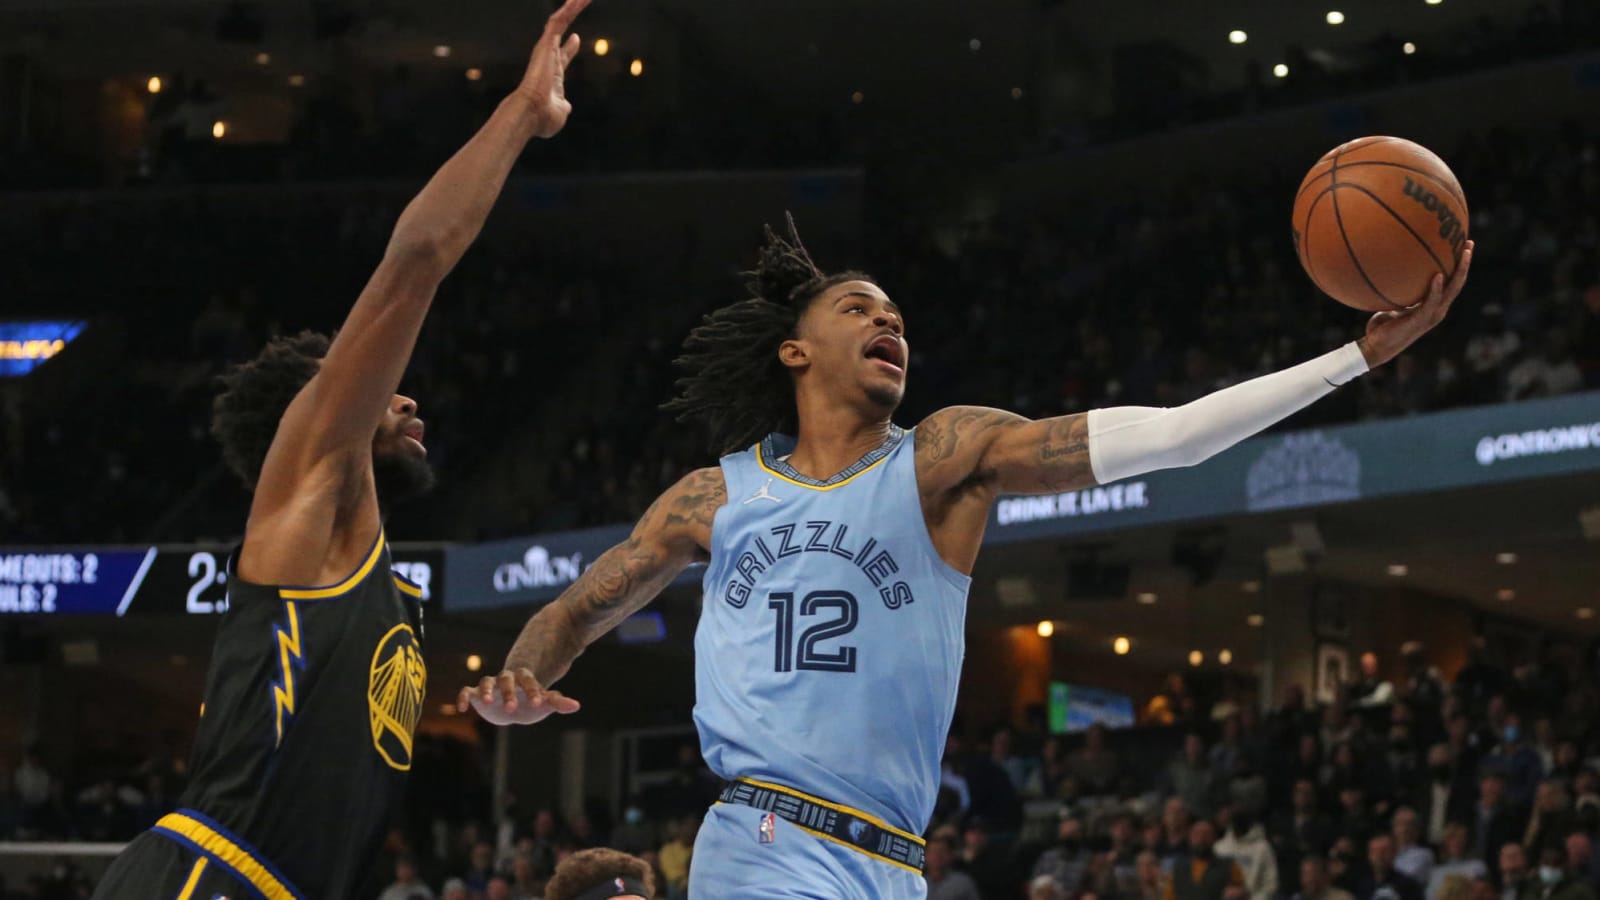 Ja Morant stares down young fan for wearing wrong jersey